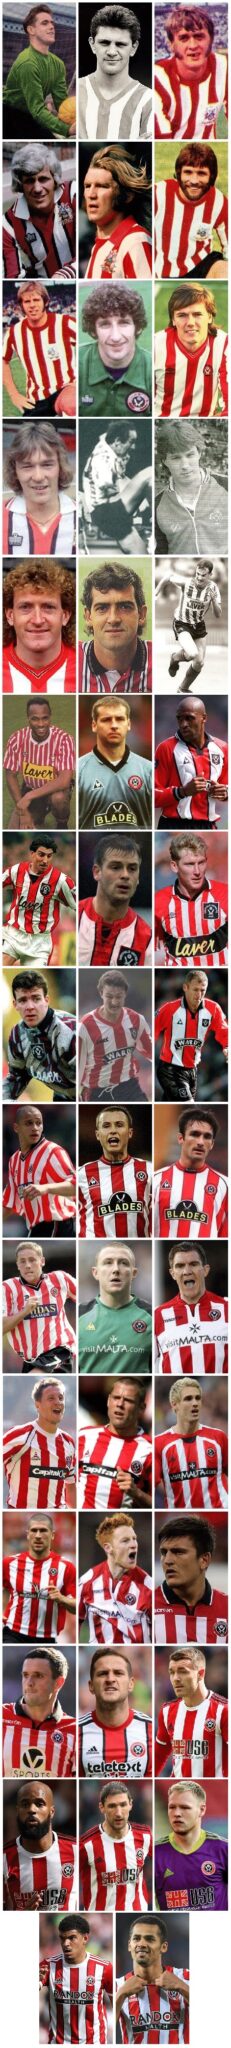 Sheffield United Player of the Year